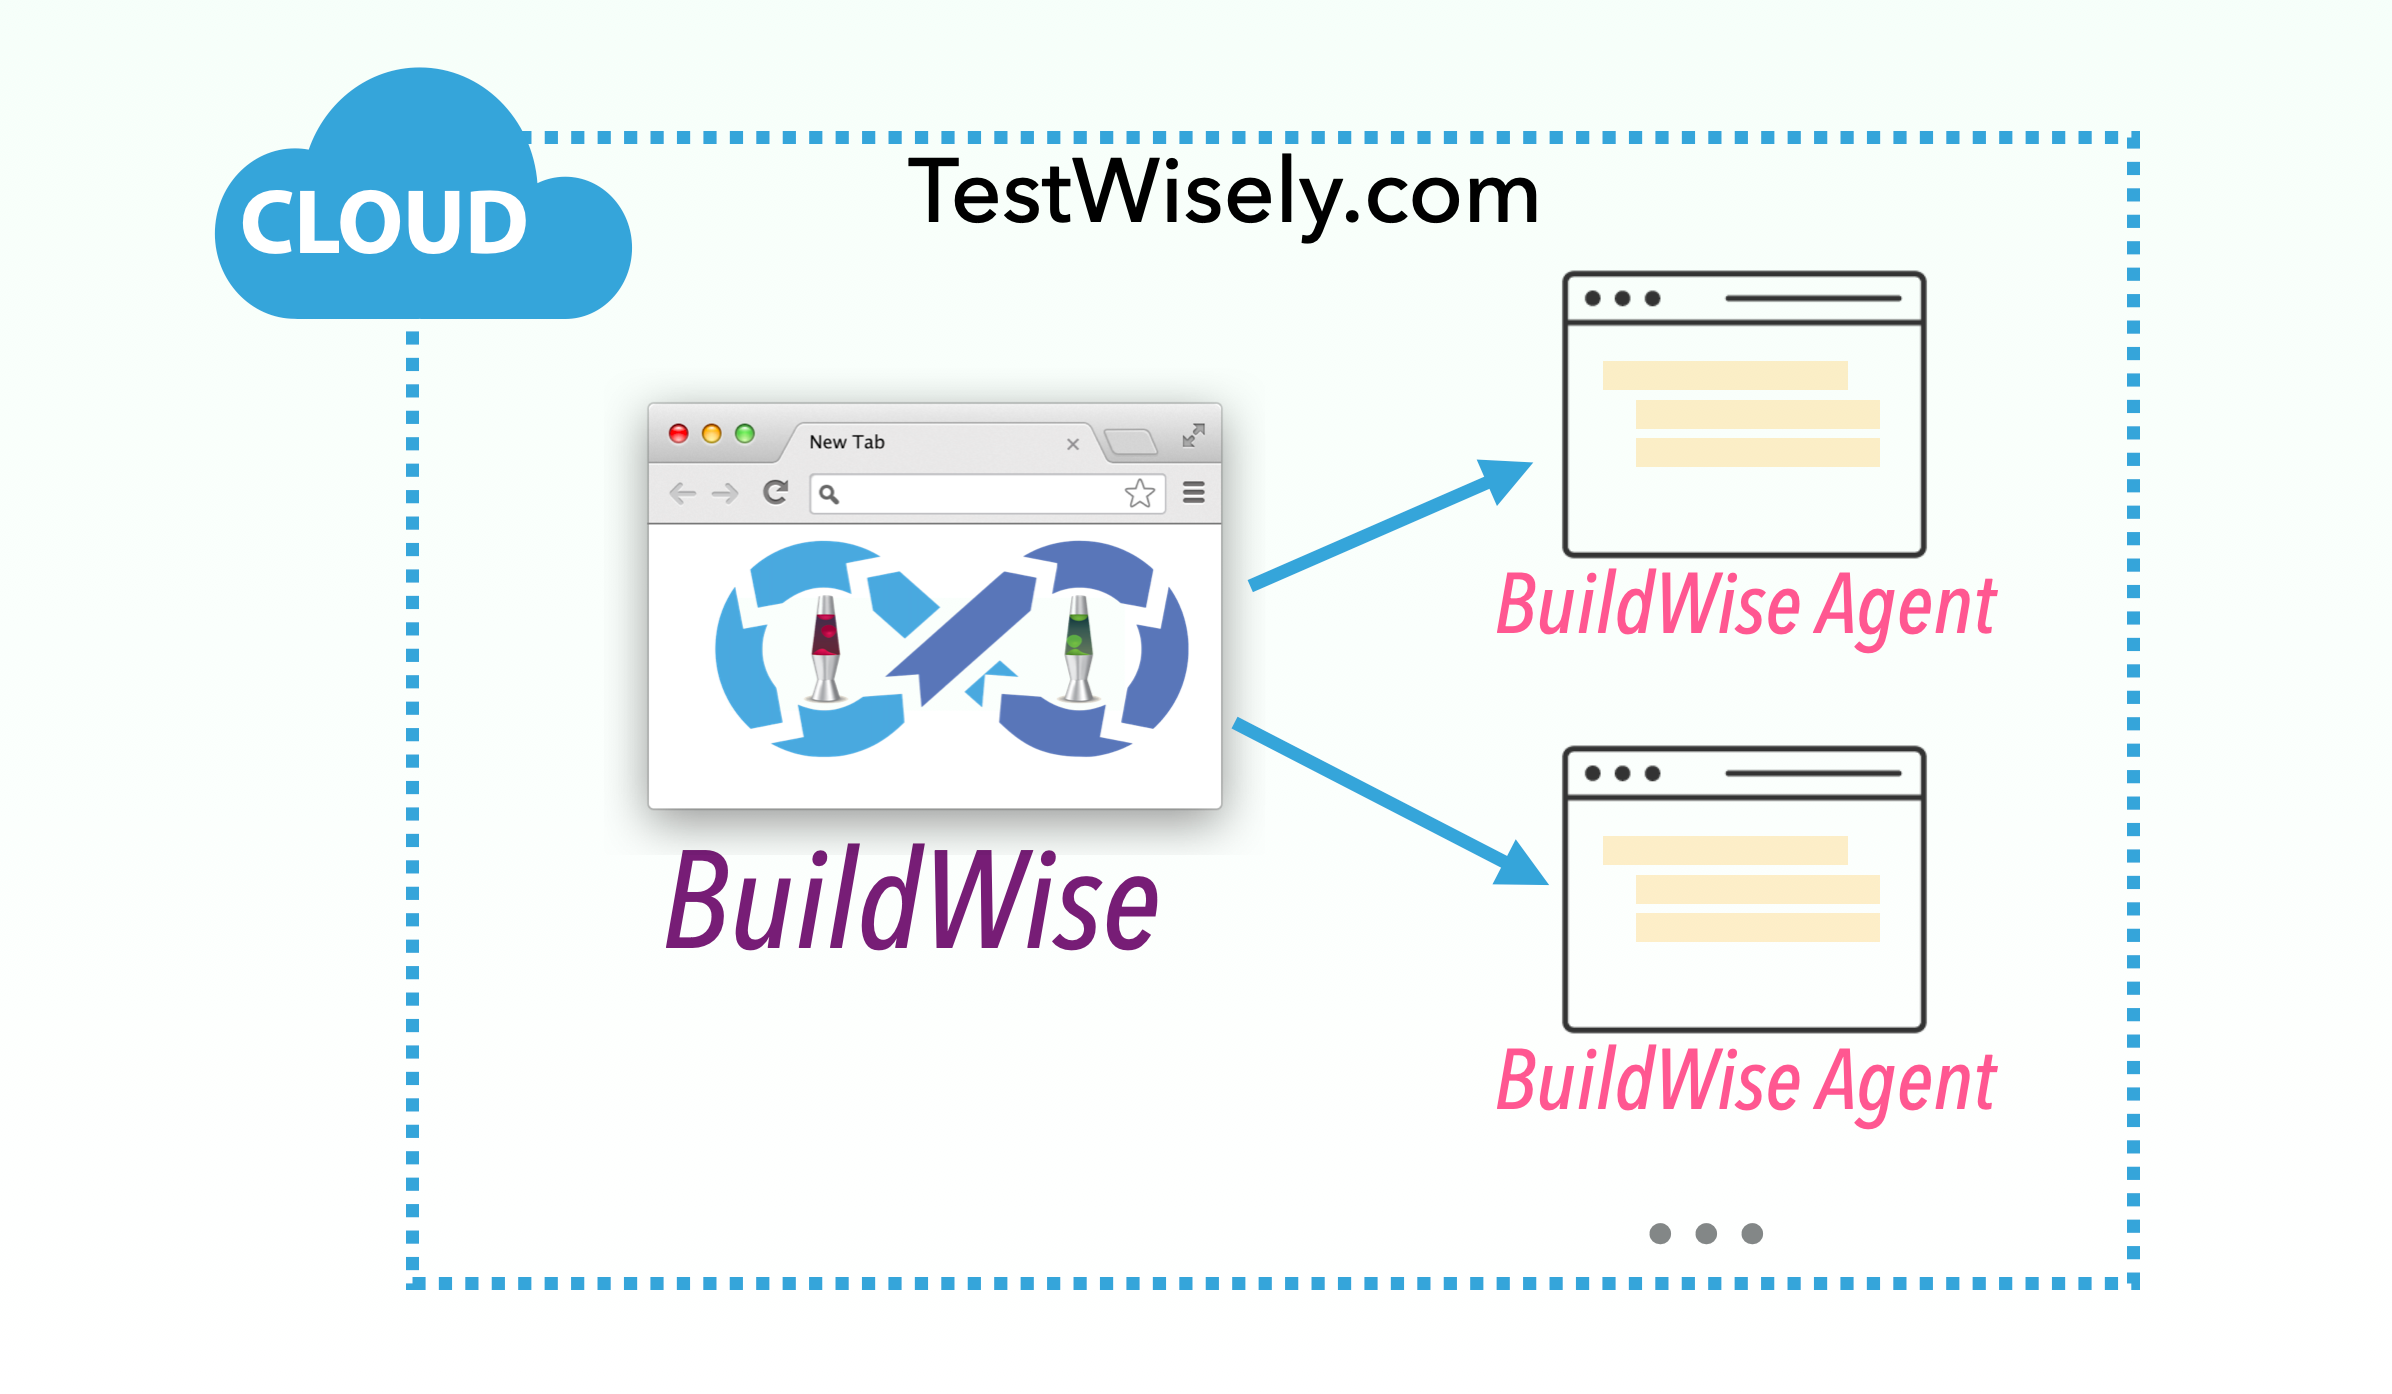 Try the Awarding-Winning BuildWise Live on the TestWisely Platform